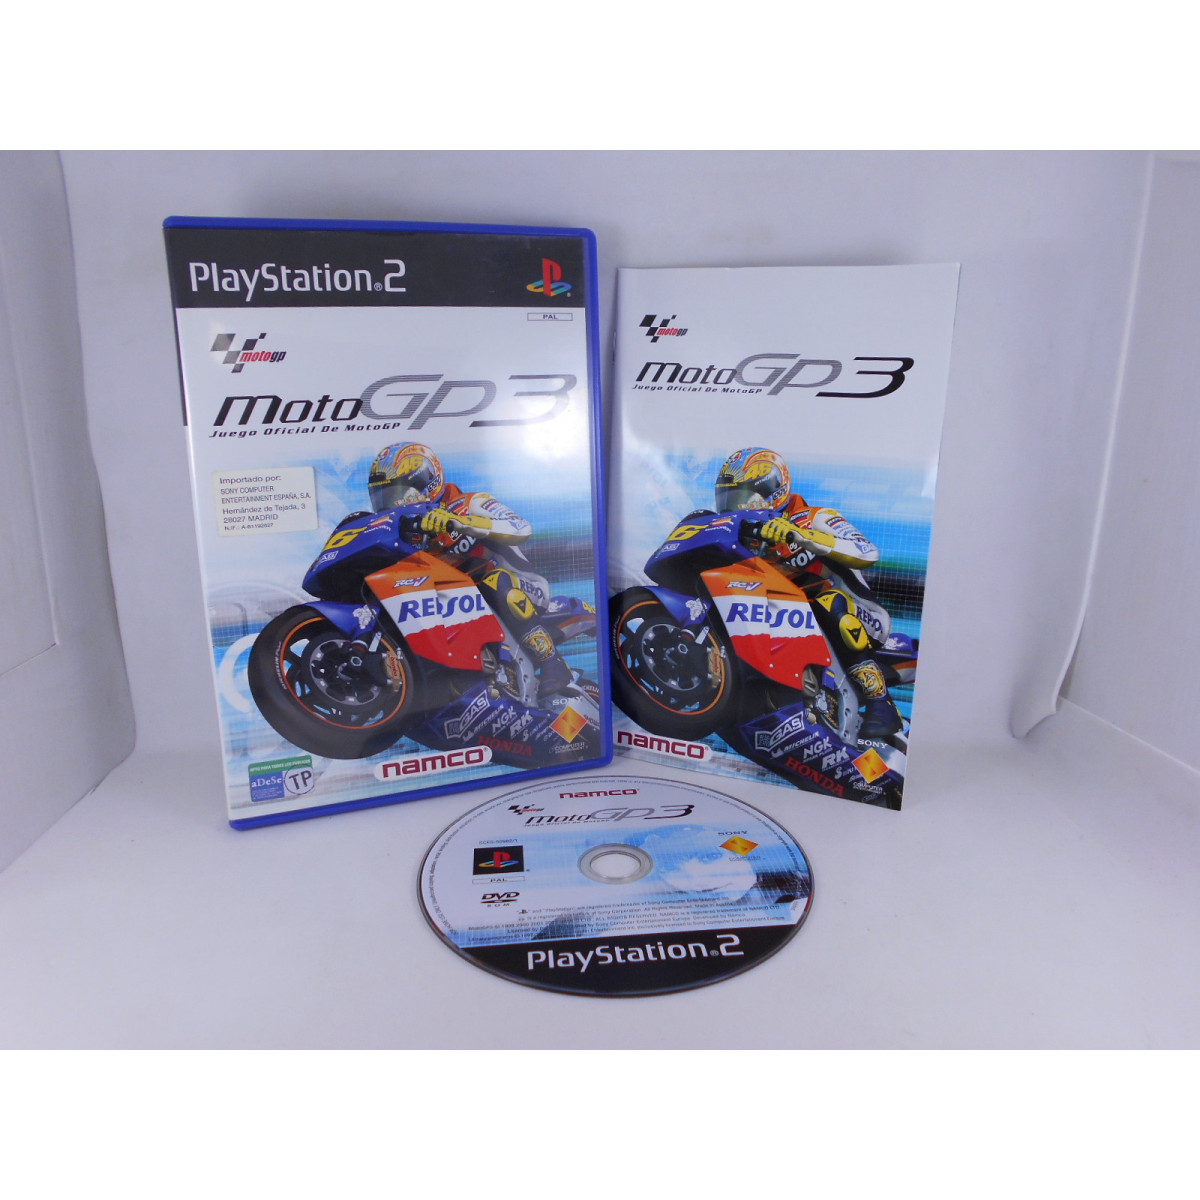 MOTO GP3 PS2 PlayStation 2 Platinum game includes manual Good Condition As  Seen